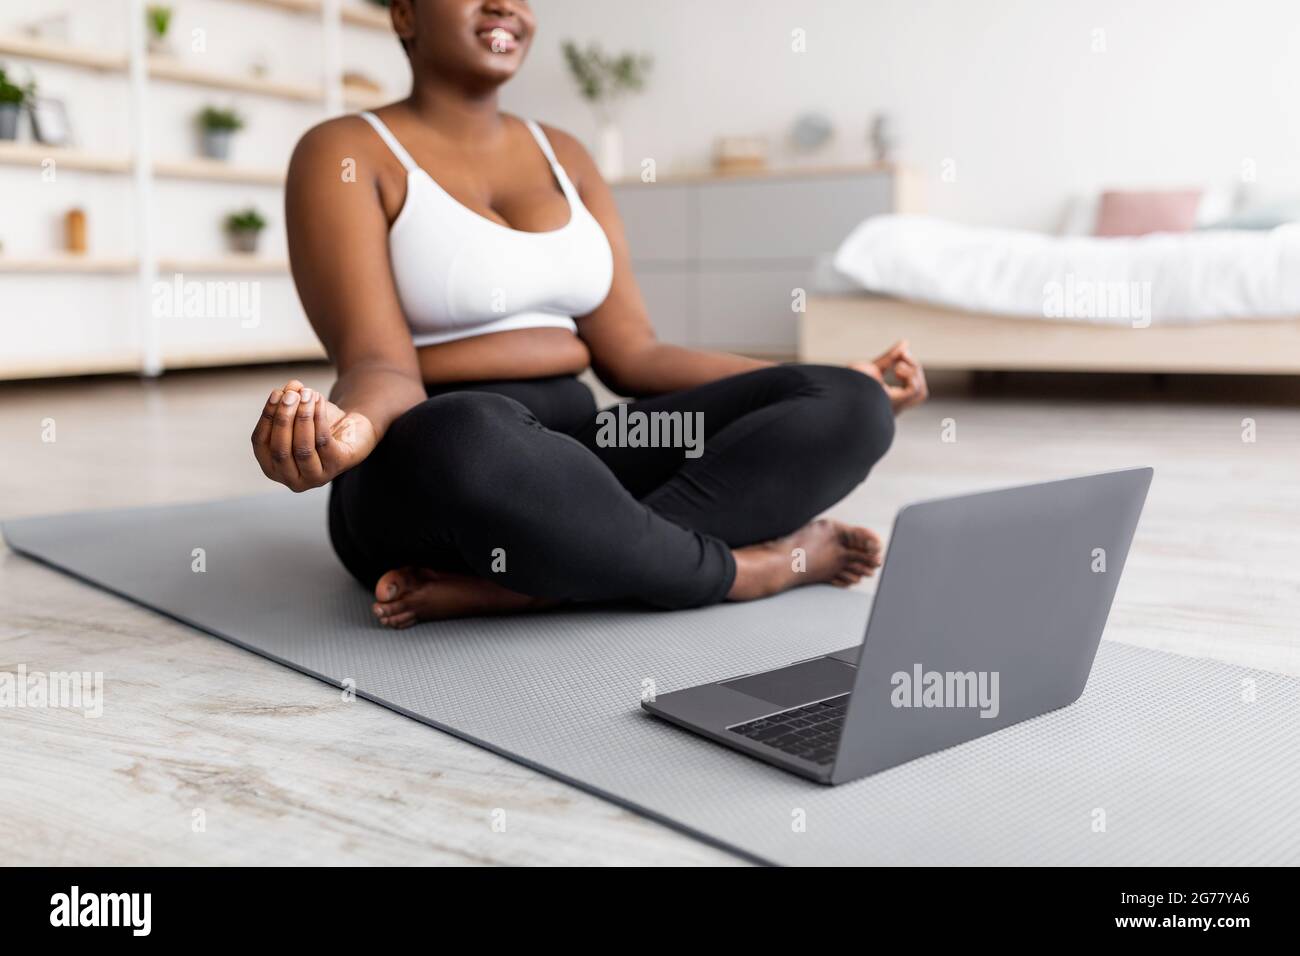 https://c8.alamy.com/comp/2G77YA6/plus-size-black-woman-having-online-meditation-or-yoga-class-sitting-in-lotus-pose-next-to-laptop-at-home-cropped-view-2G77YA6.jpg